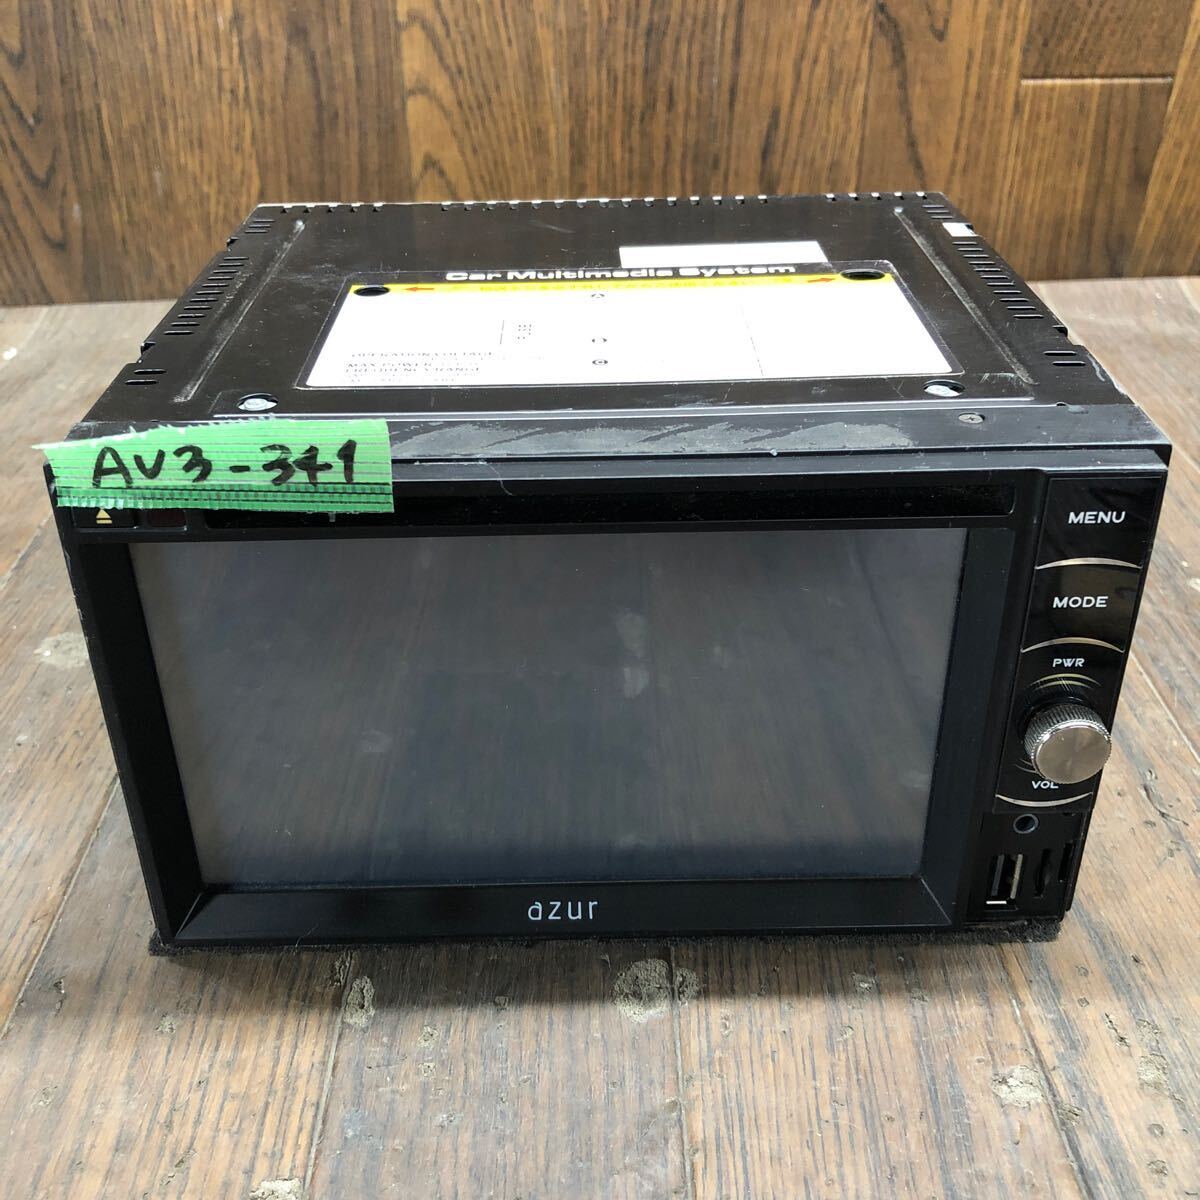 AV3-341 super-discount car stereo azur pattern number unknown Car Multimedia System CD DVD USB SD AUX electrification not yet verification Junk 